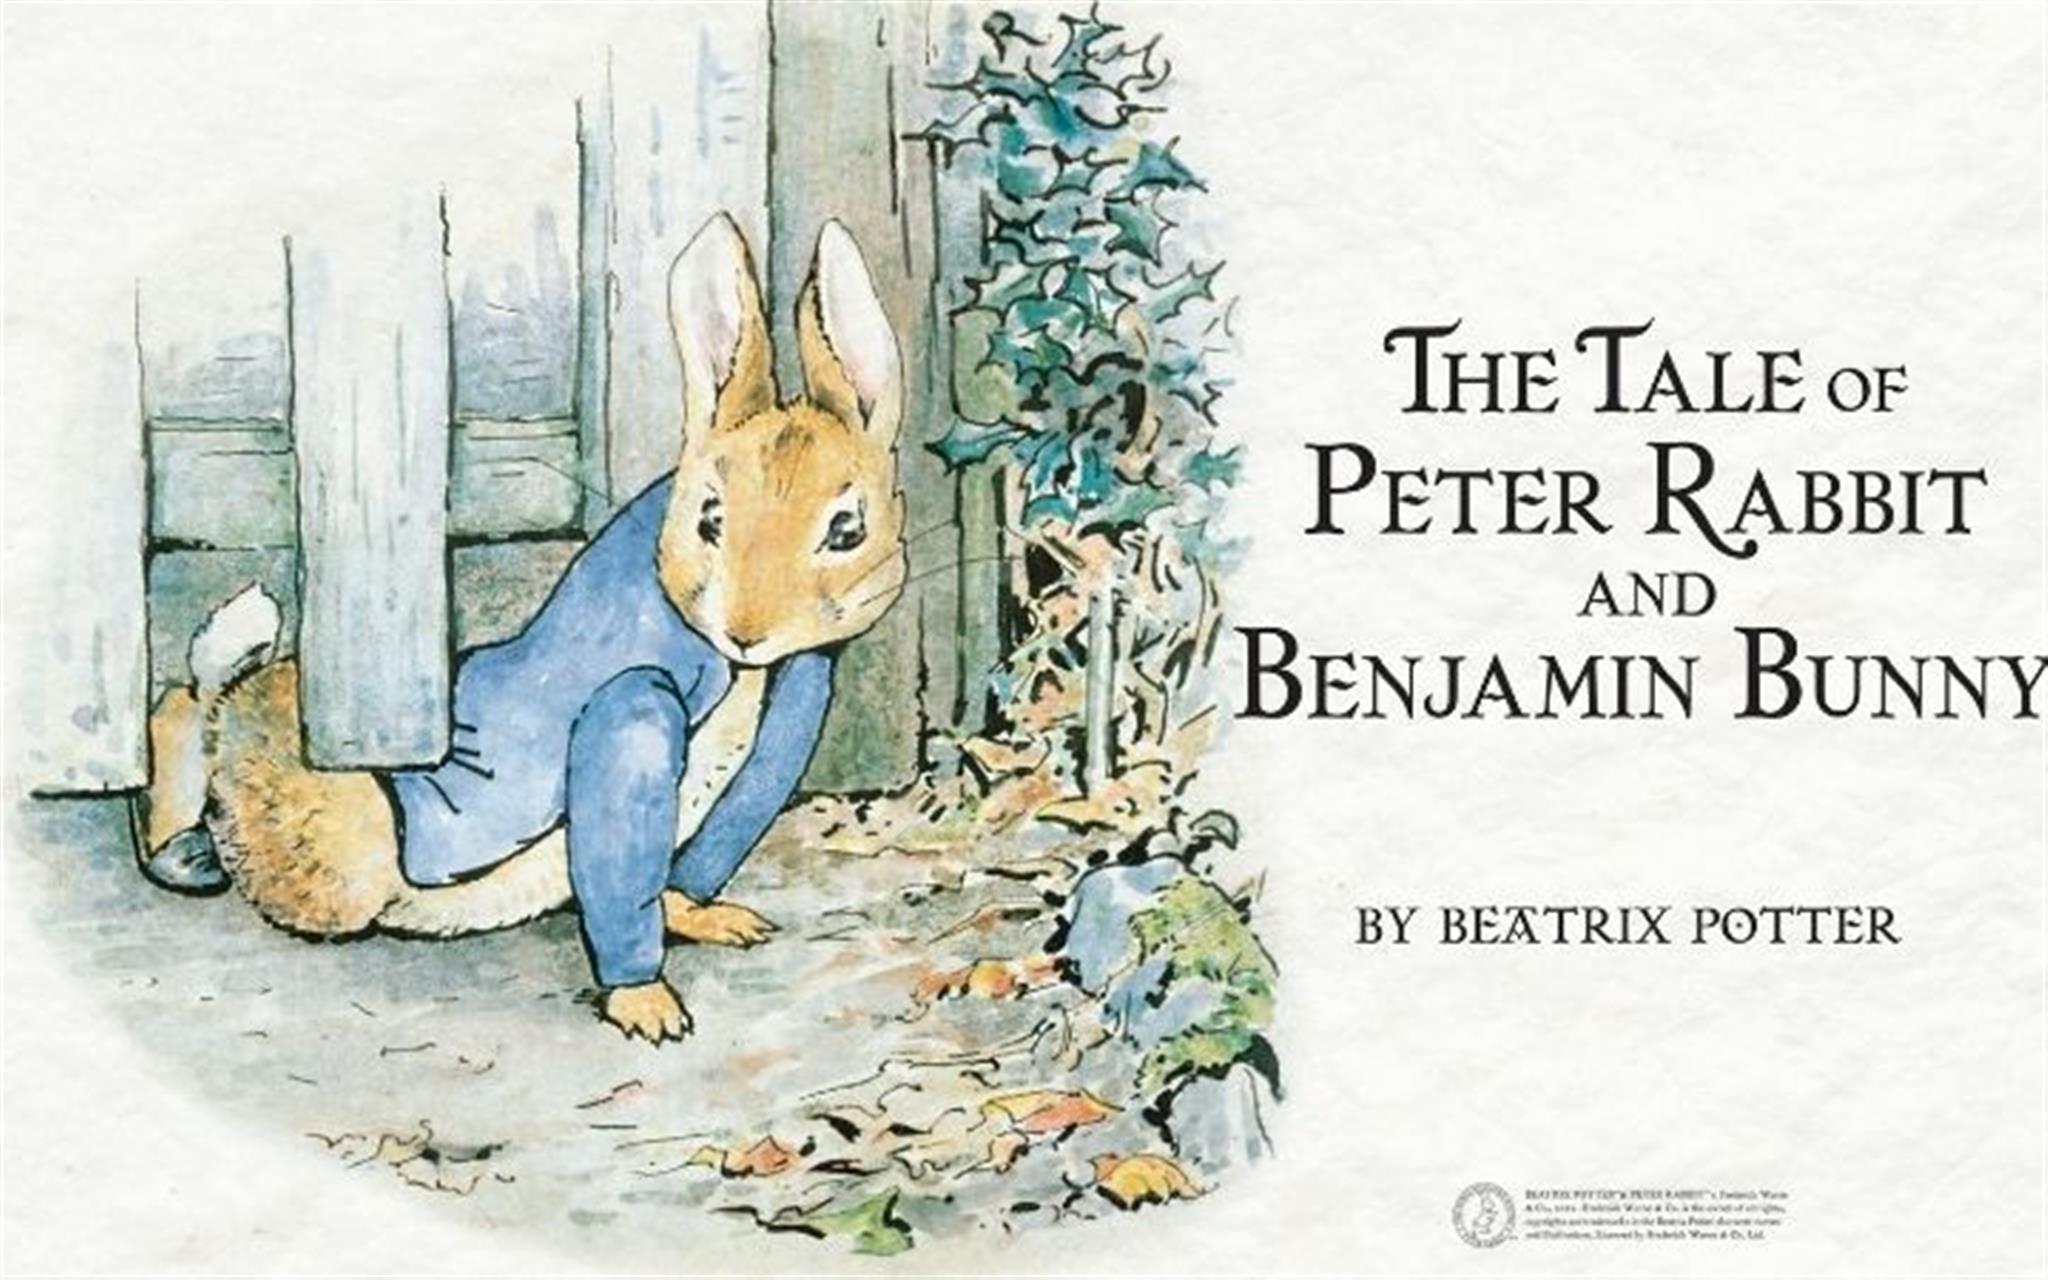 Theatre in the Parks  – The Tale of Peter Rabbit and Benjamin Bunny - West Stow